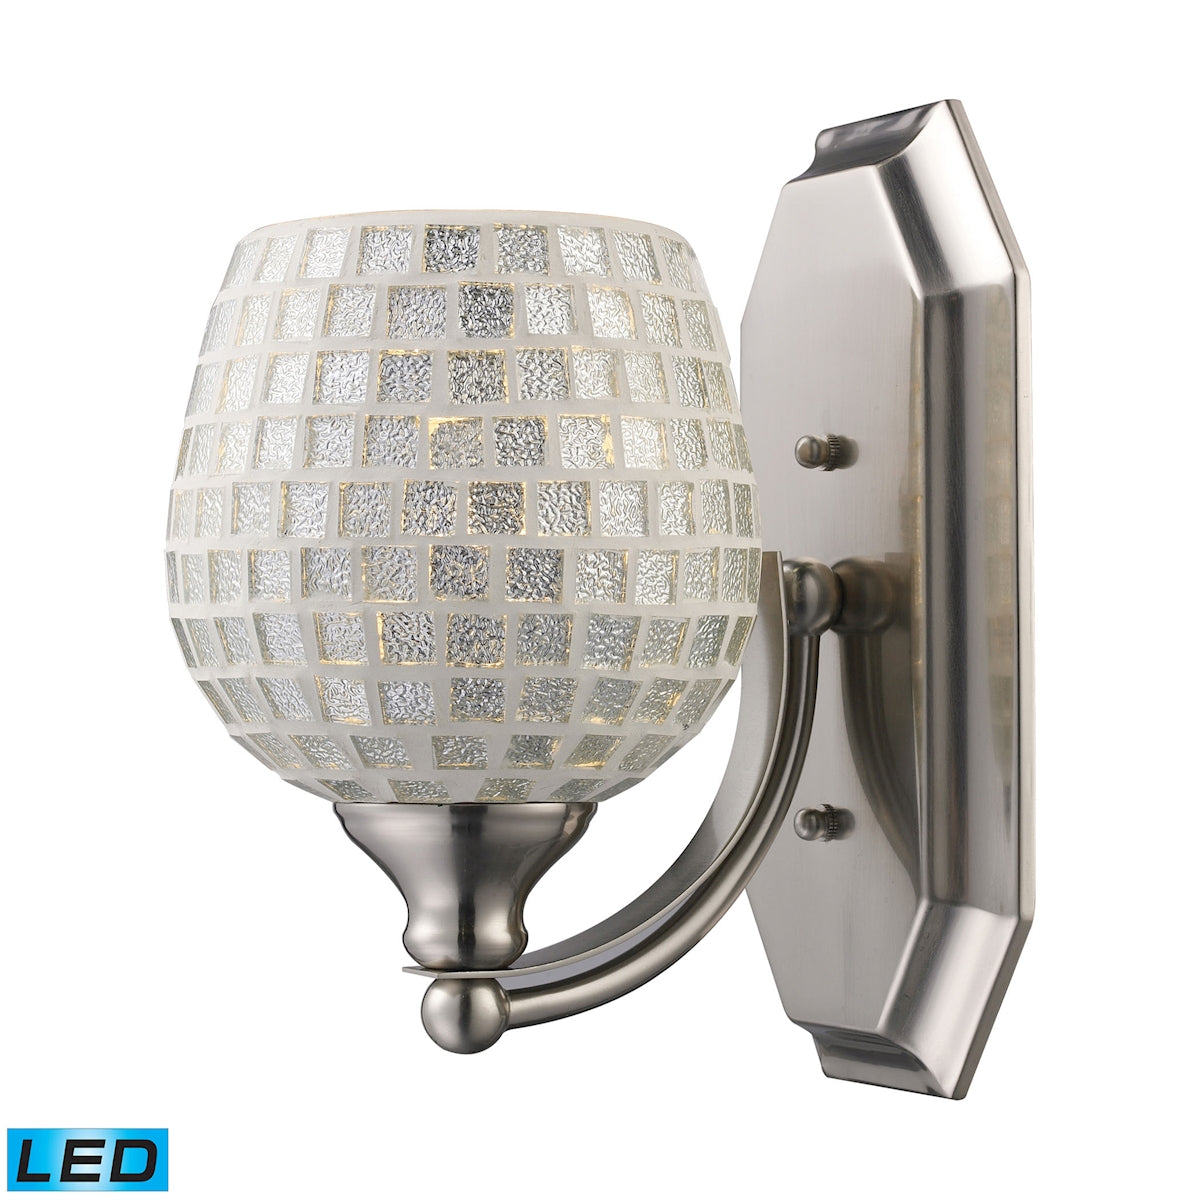 ELK Lighting 570-1N-SLV-LED Mix-N-Match Vanity 1-Light Wall Lamp in Satin Nickel with Silver Glass - Includes LED Bulb